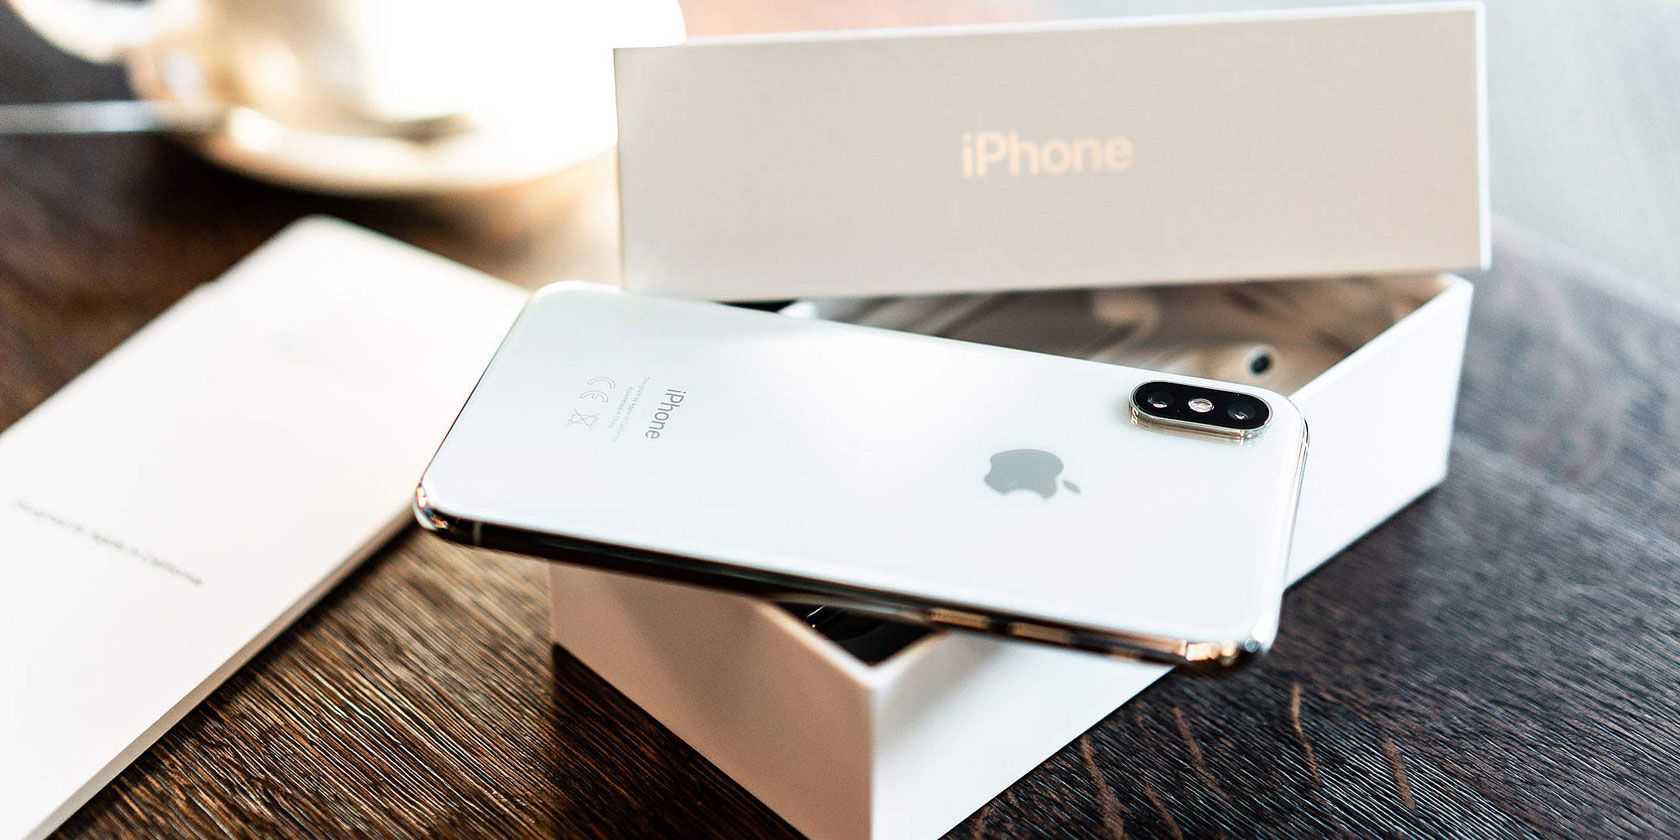 is it better to buy iphone from apple or verizon